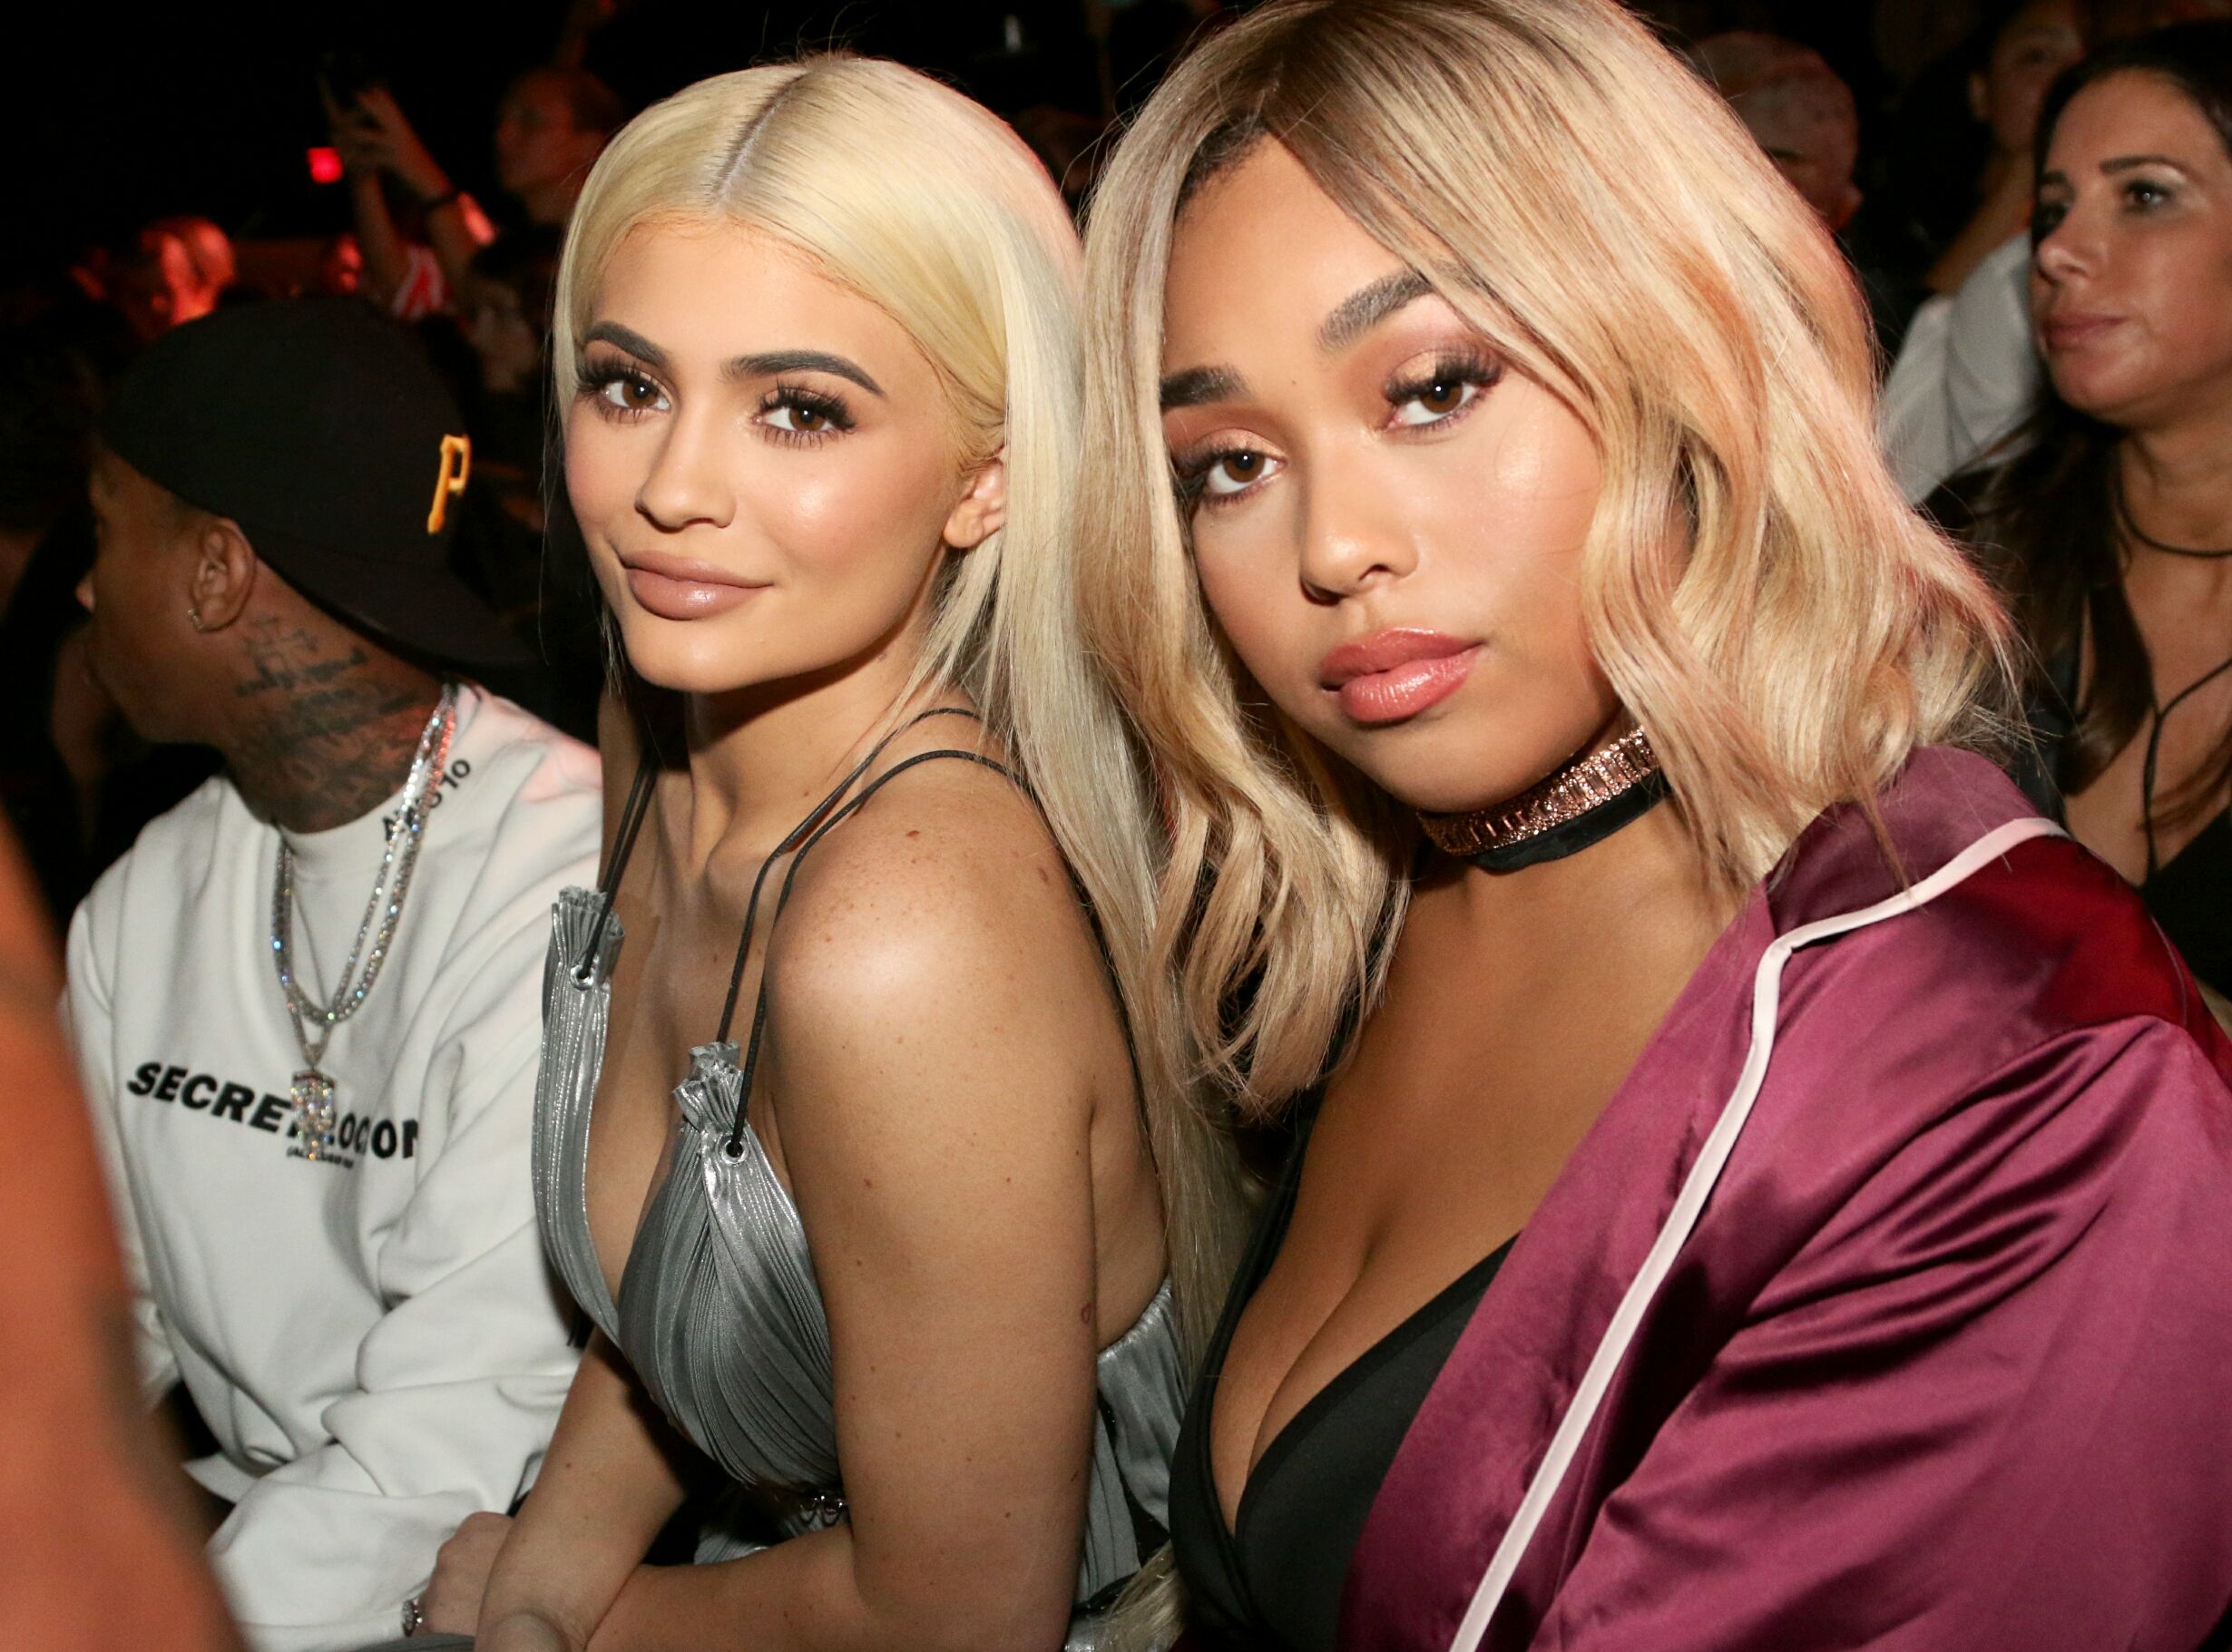 Friends Again? Kylie Jenner & Jordyn Woods Spotted Together Four